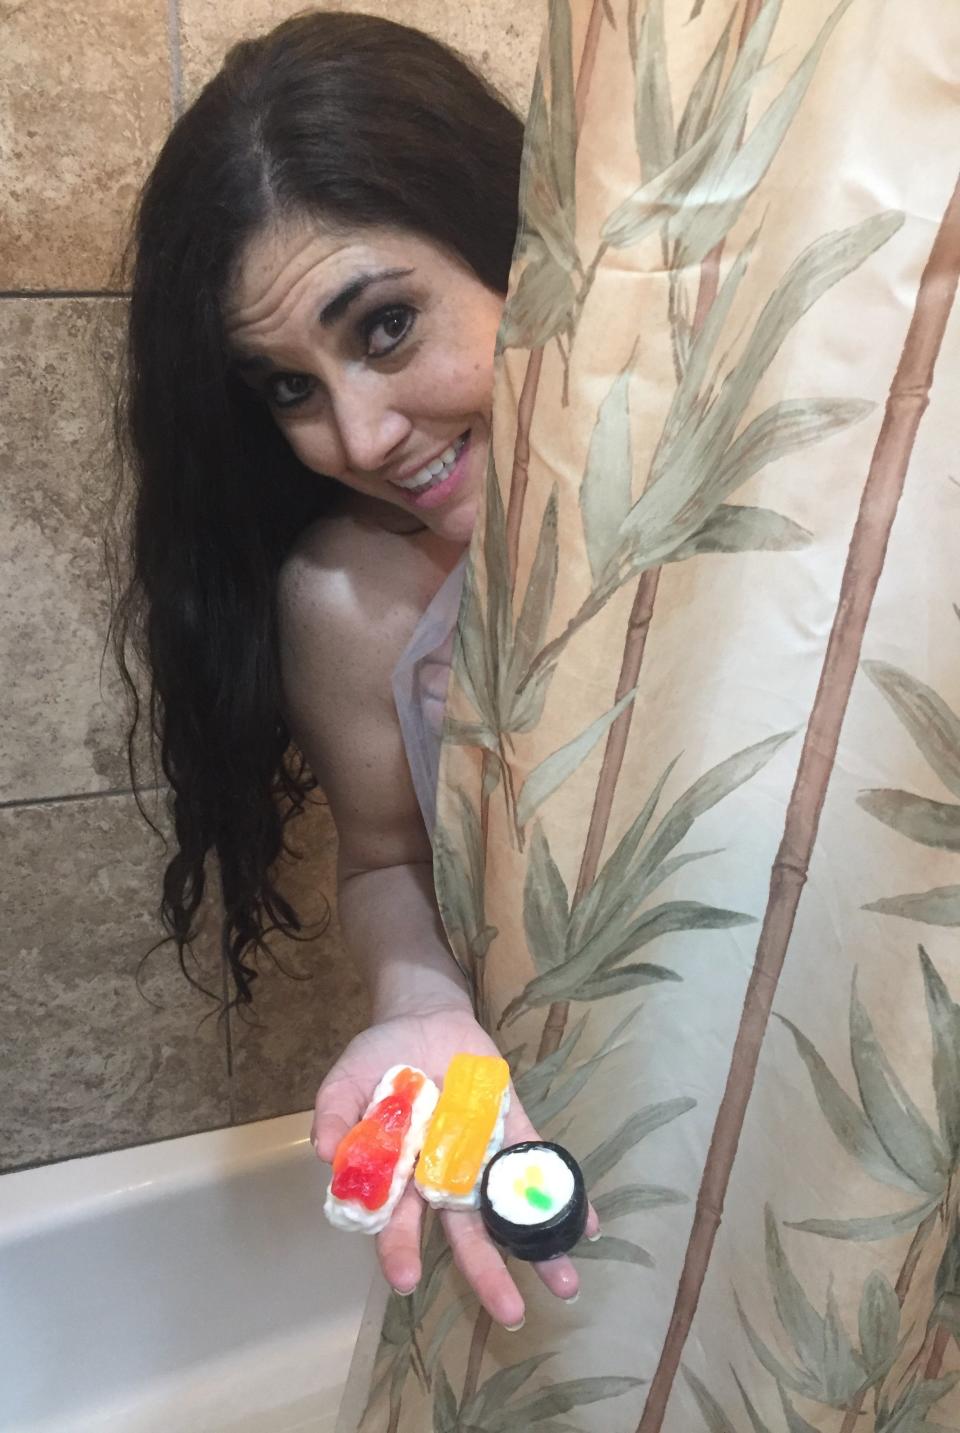 Bathing with your Valentine? That's sweet, but ordinary soap seems so, so ordinary. But you can definitely amp up the romance level when <a href="https://www.scottsmarketplace.com/store/bigtranchsoap/product/1o5061" target="_blank">the soap is shaped like the fish</a> you picked up yesterday at your supermarket's sushi counter.